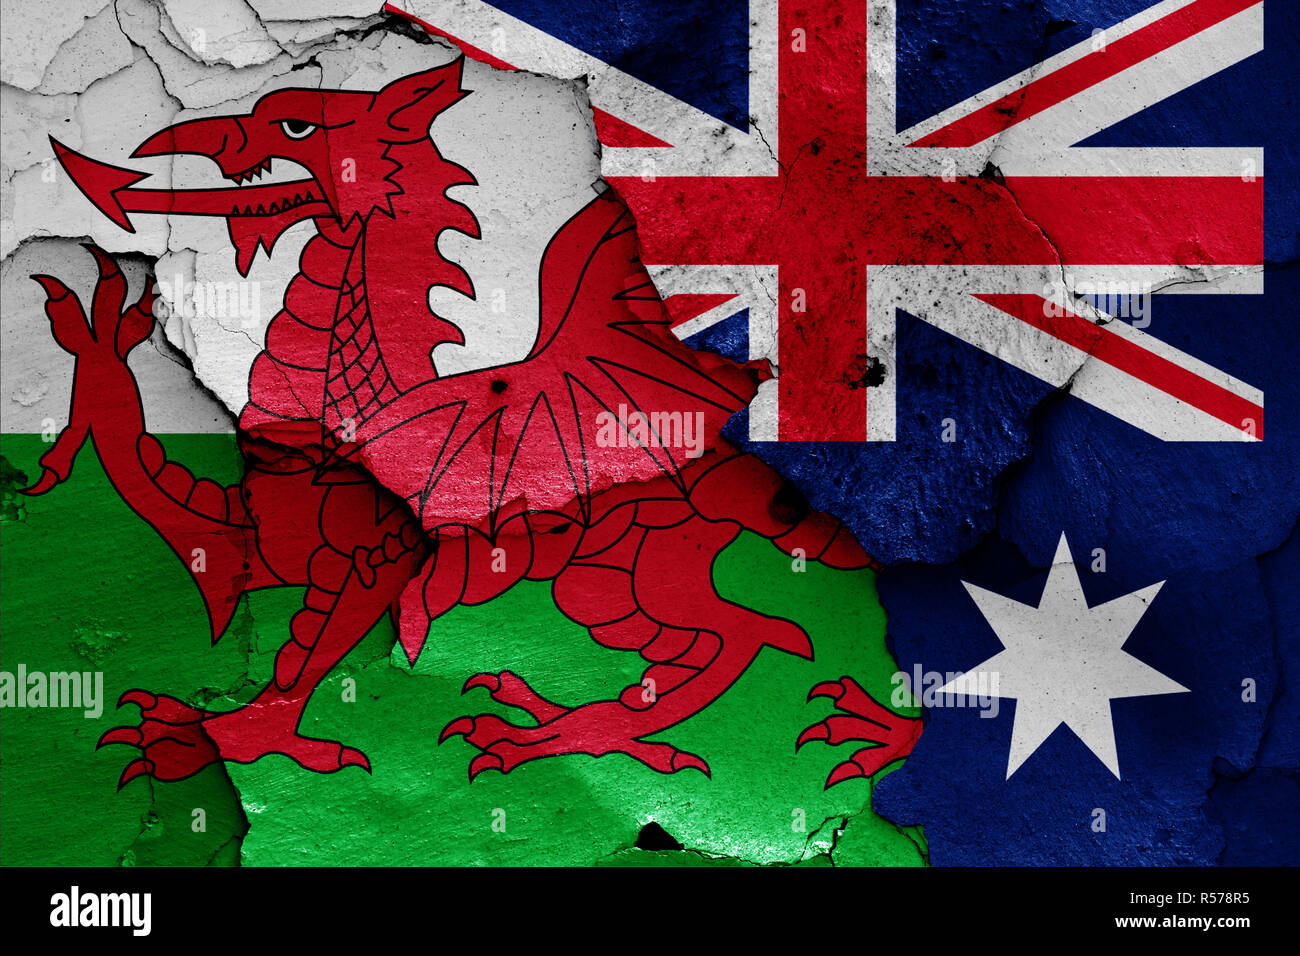 flags of Wales and Australia painted on cracked wall Stock Photo